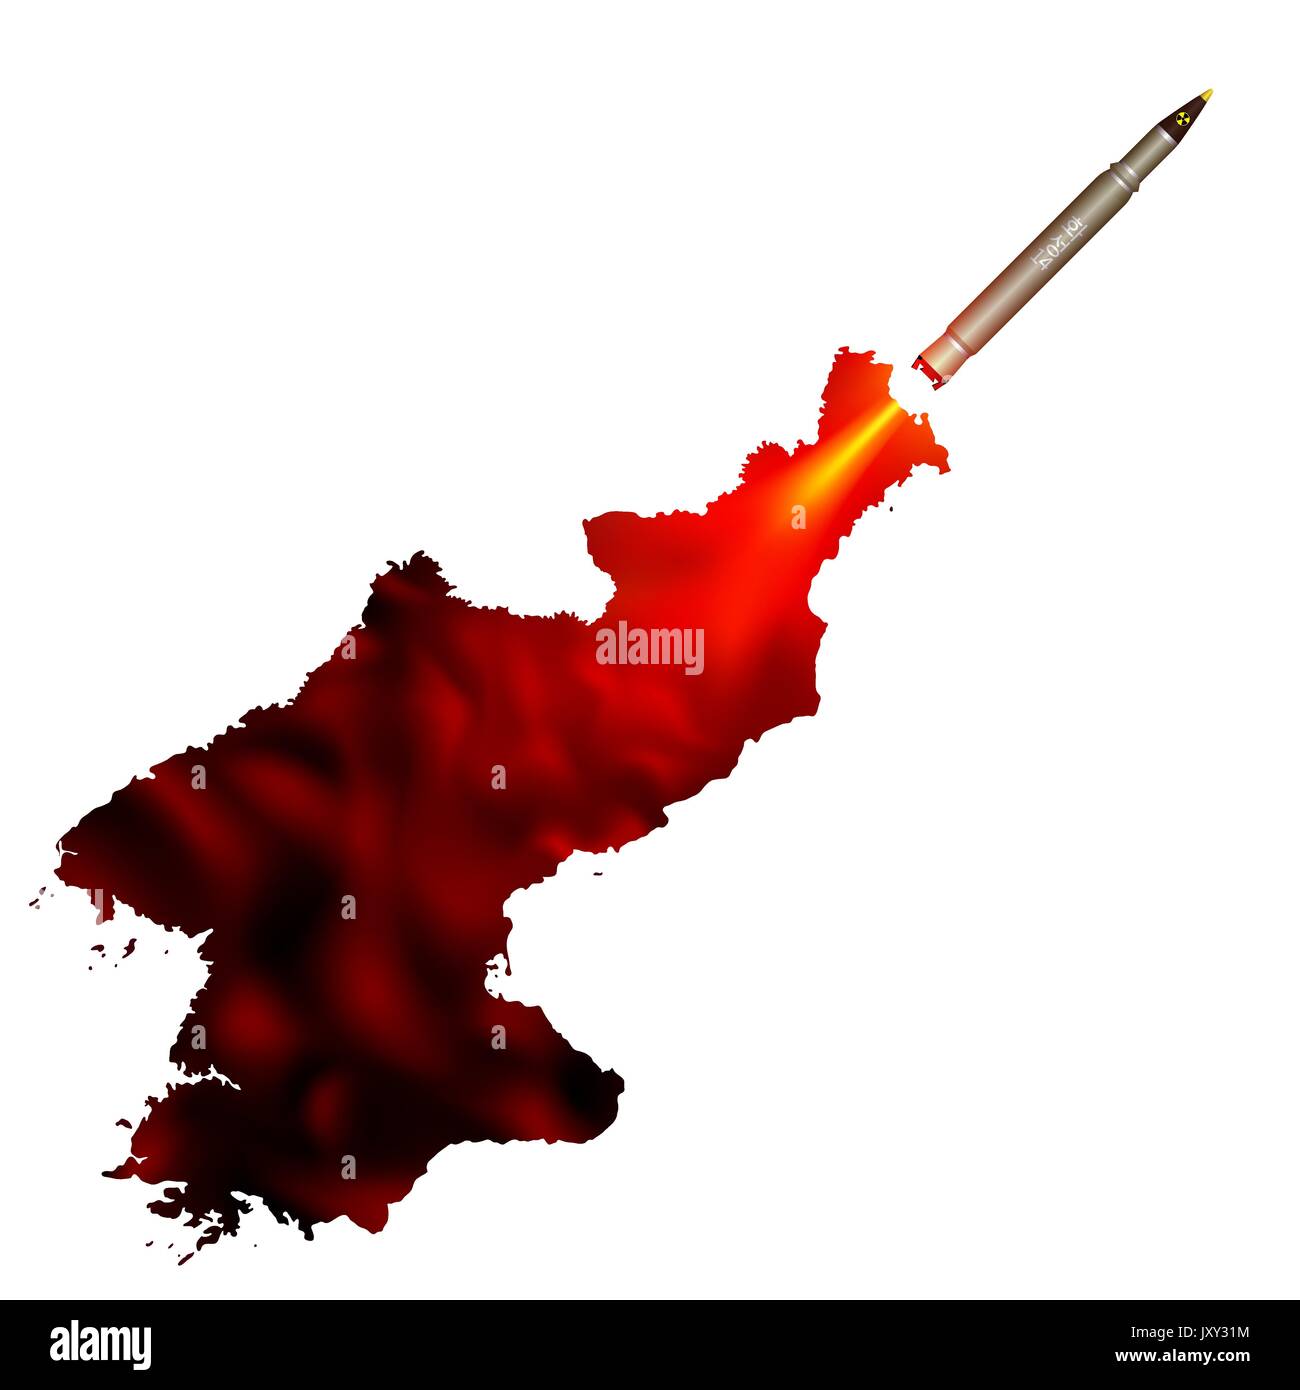 Launch of a ballistic nuclear missile. Smoke trail draws the shape of a North Korean map. Political art against a provocation of atomic World War. Stock Vector